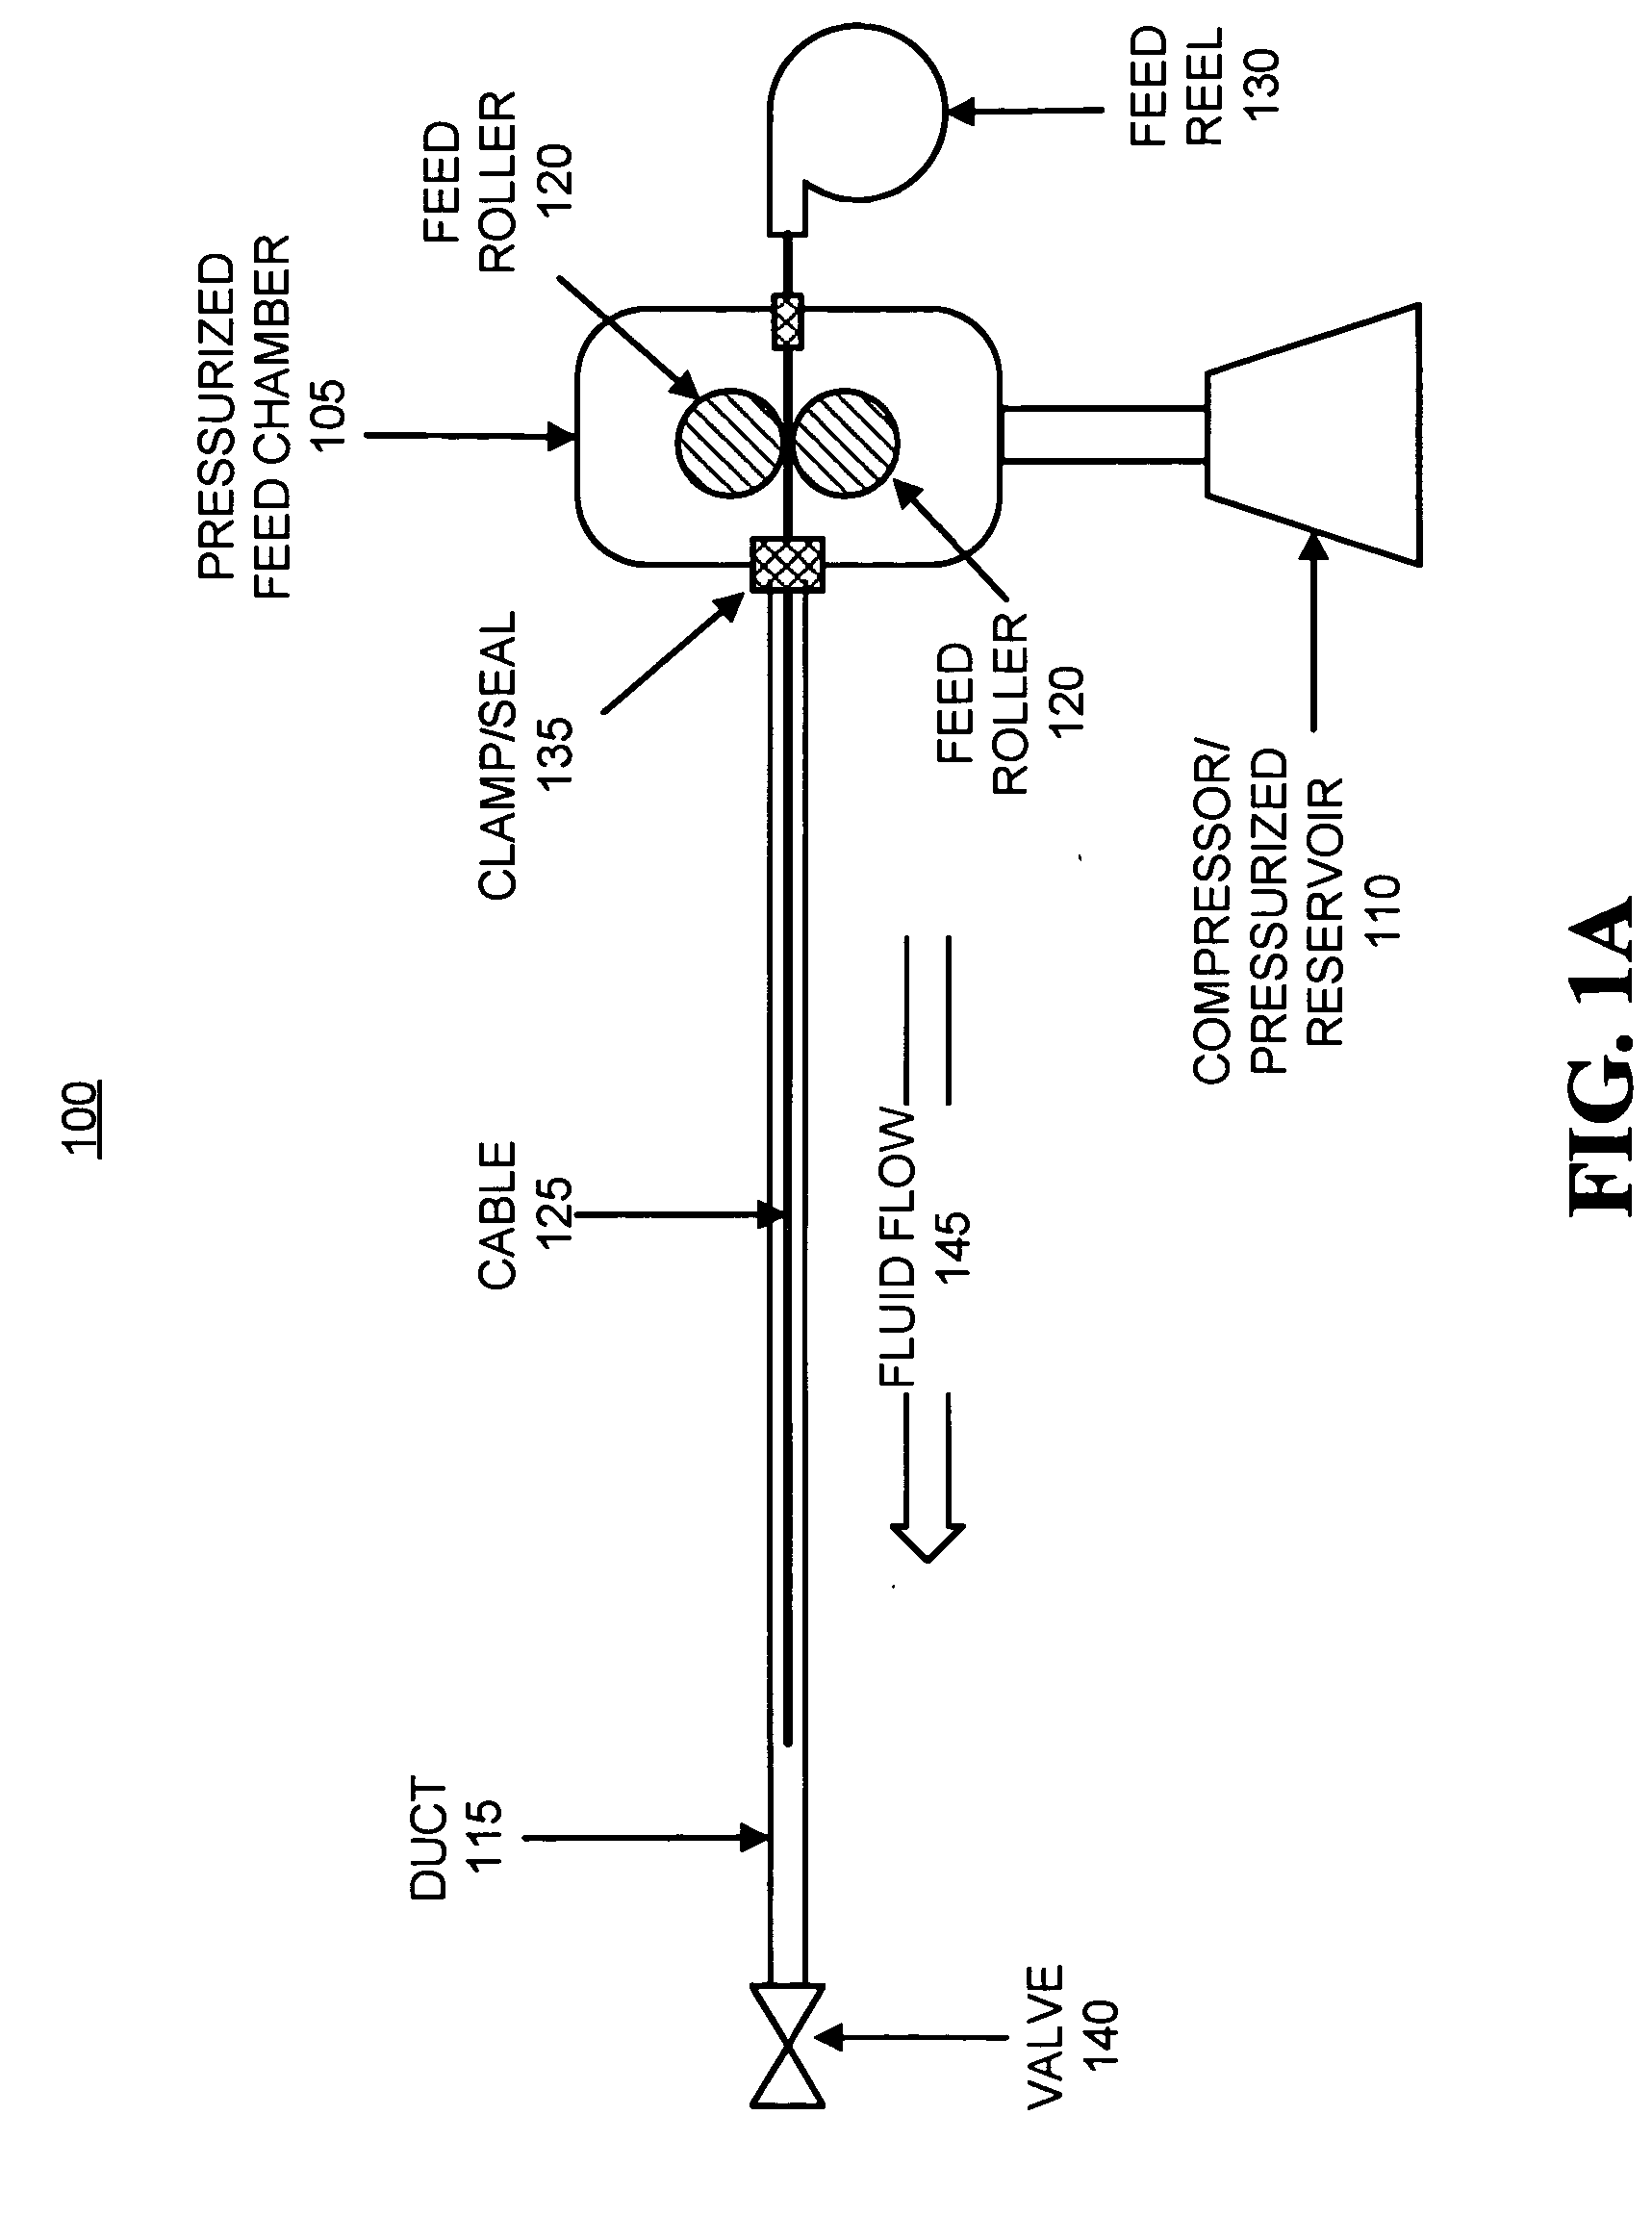 Systems and methods for controlling duct pressurization for cable installation